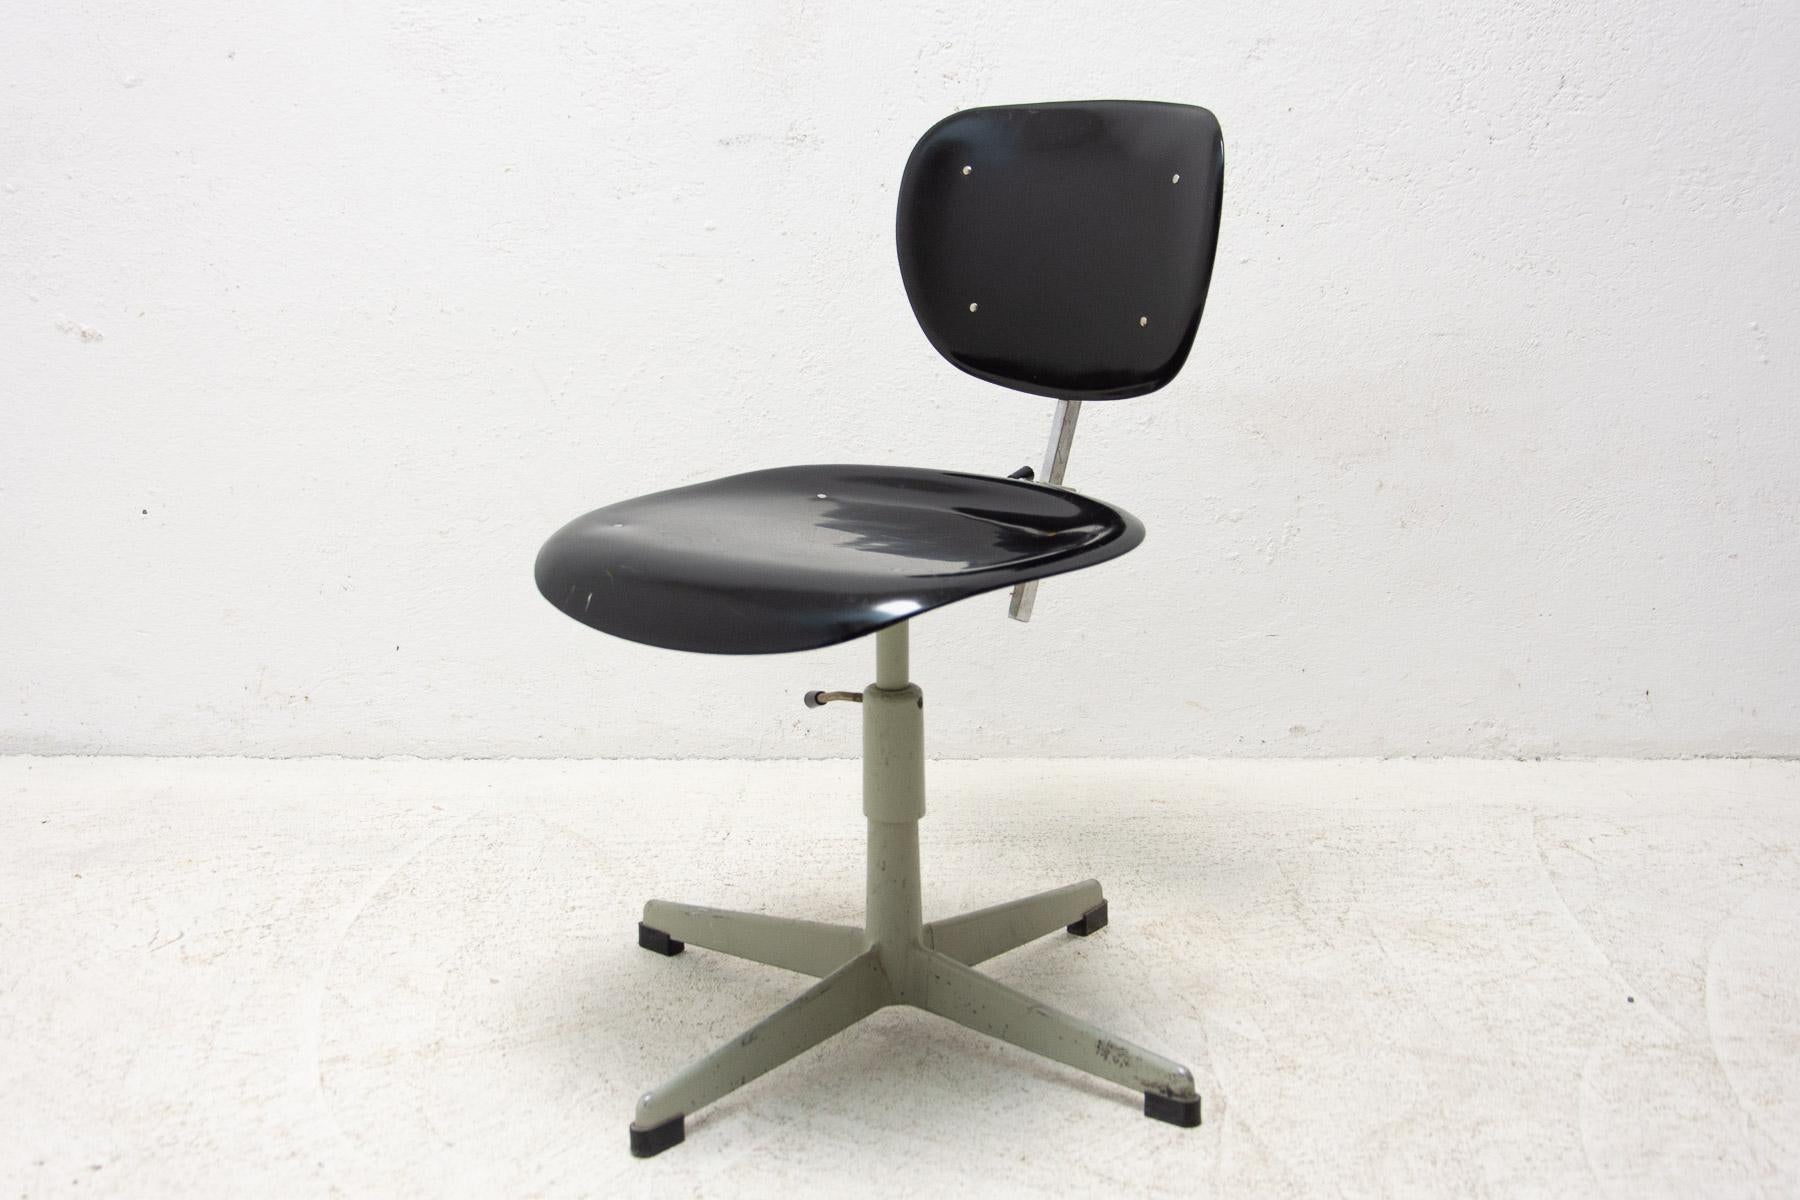 This Industrial mid century working desk chair was made by Kovona company in the 1950´s.

Fully functional, adjustable, Swivelling. Made of plastic and iron.

In good Vintage condition, showing slight signs of age and using.

 

Measures: